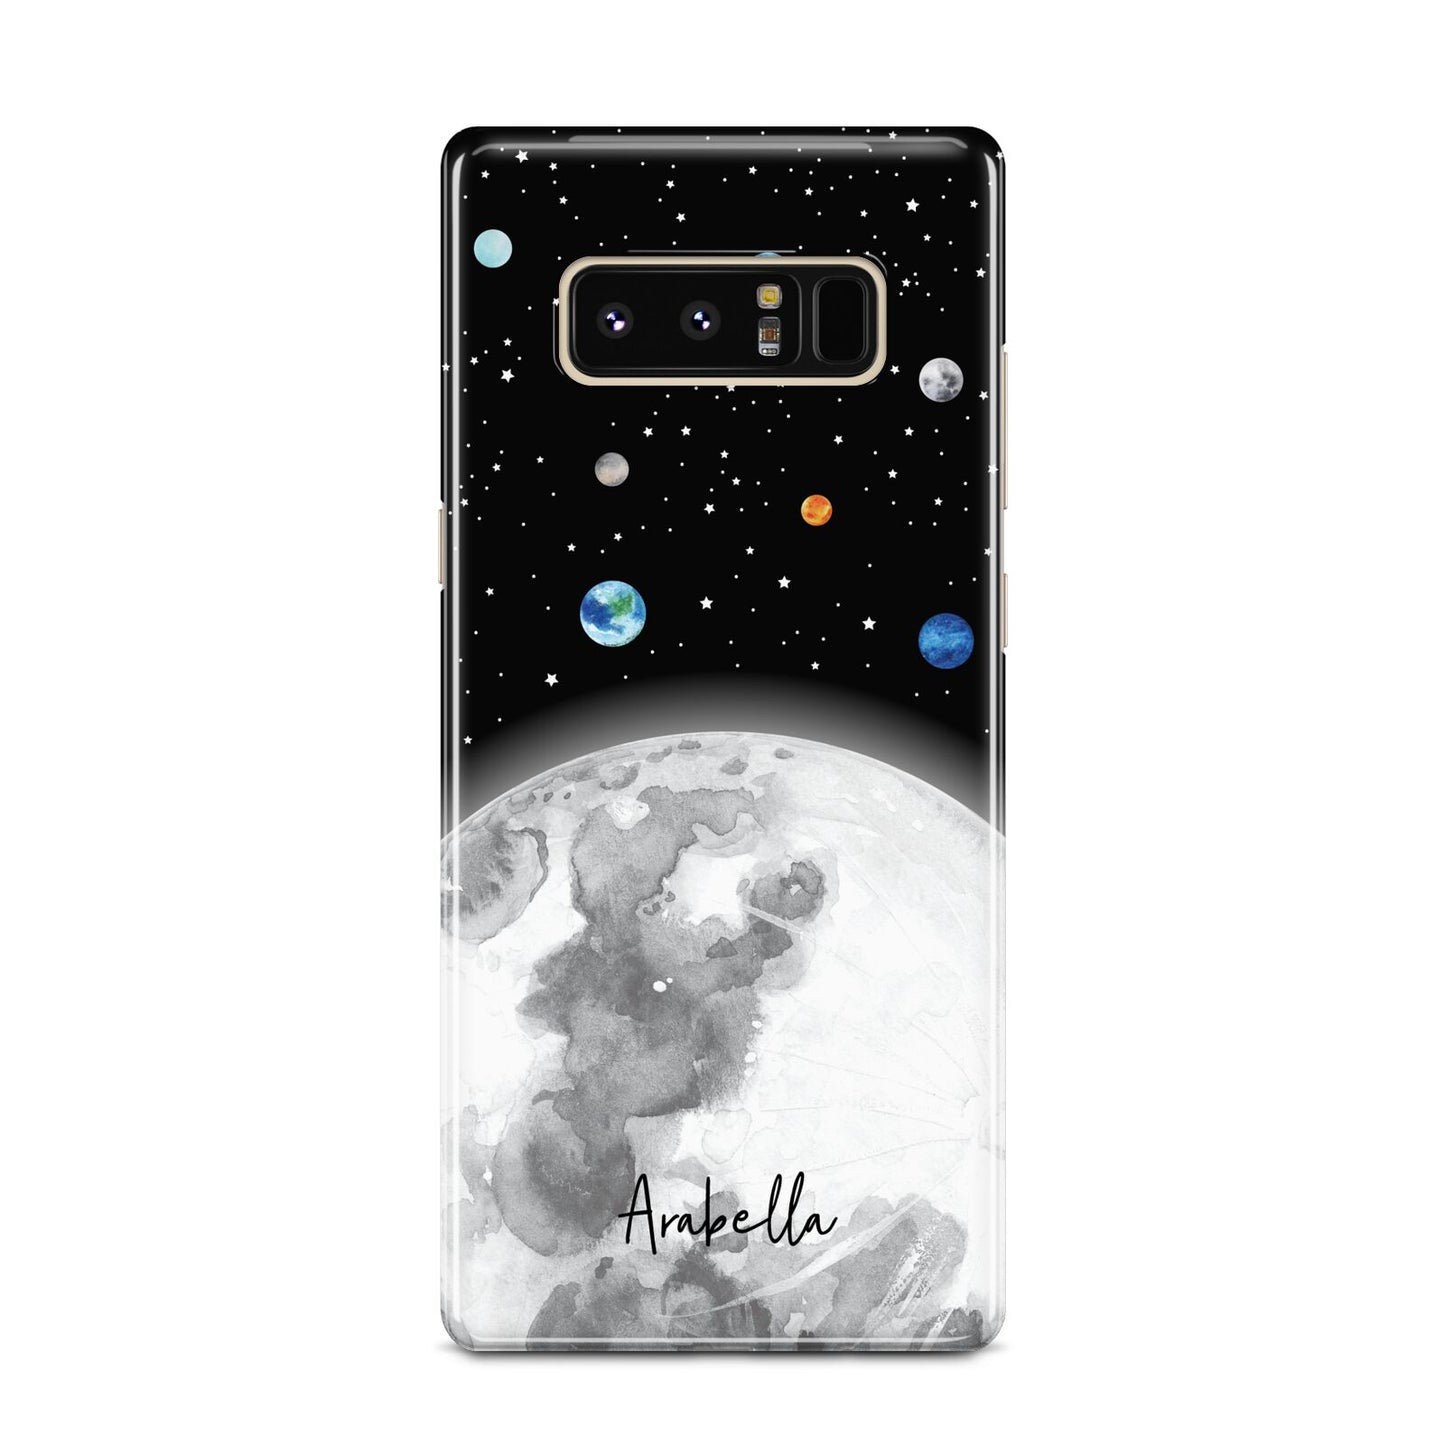 Watercolour Close up Moon with Name Samsung Galaxy Note 8 Case